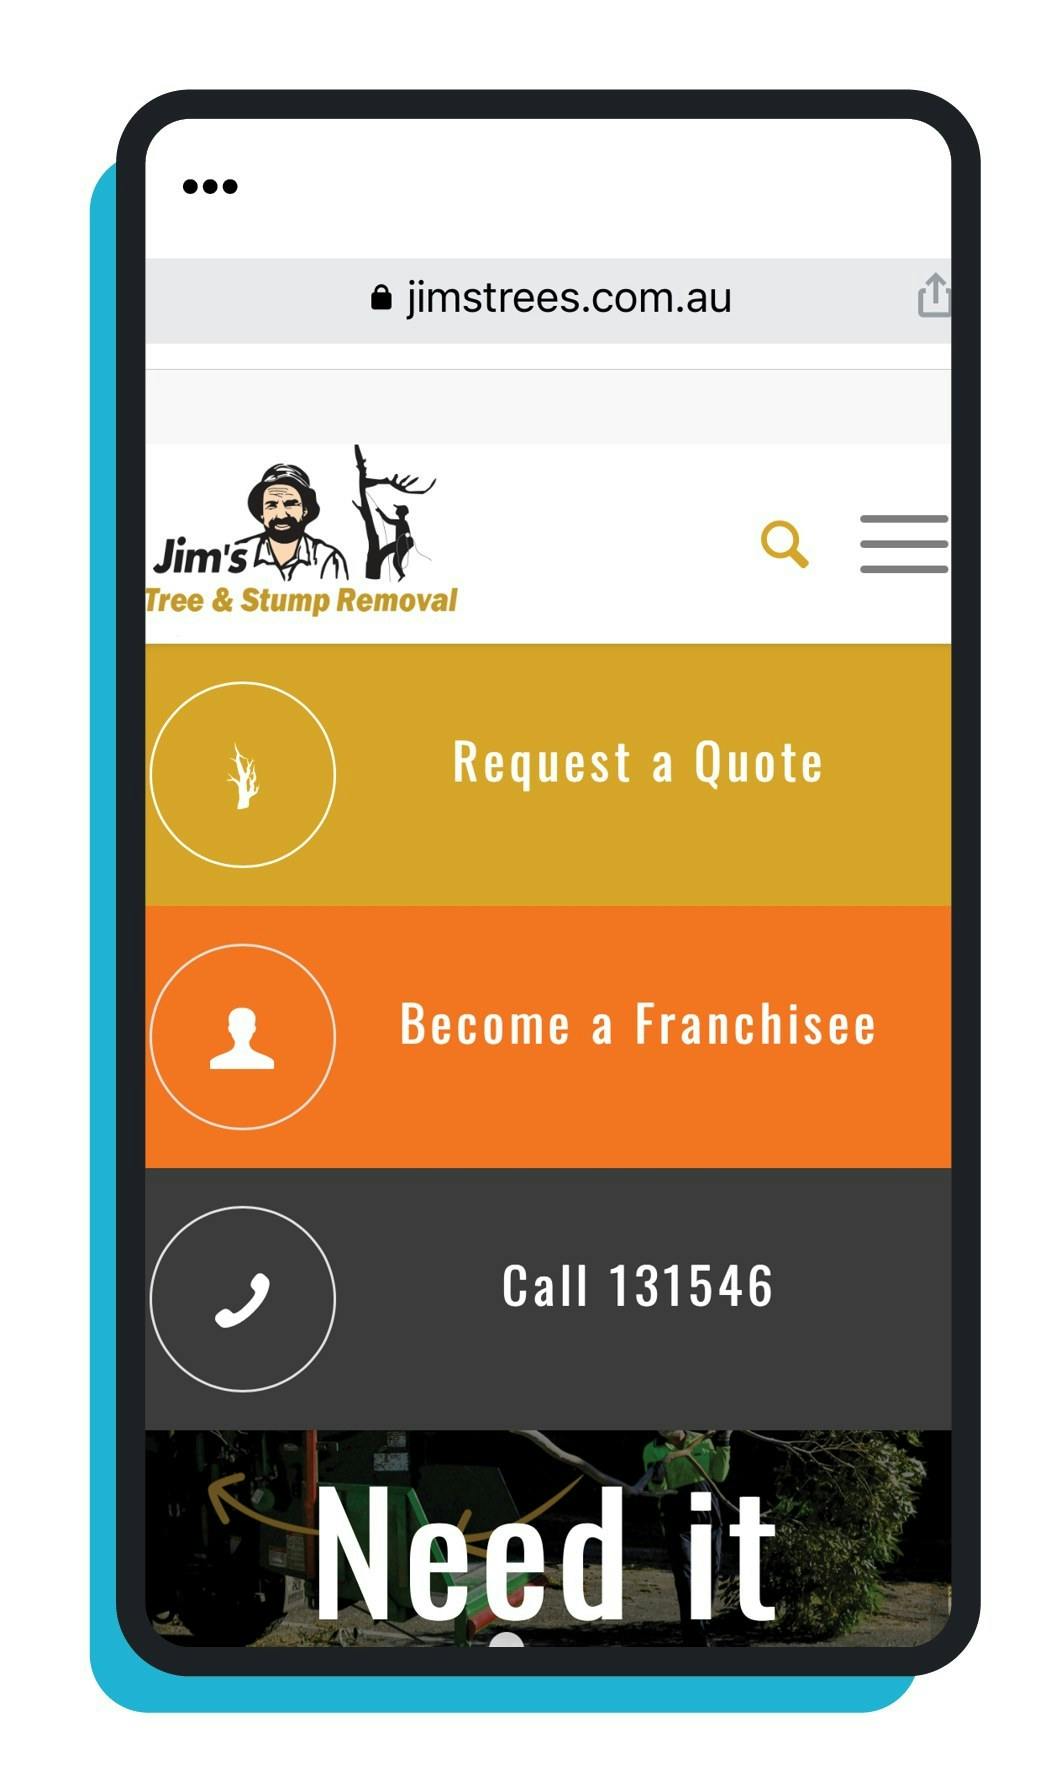 jims tree and stump removal website on iphone